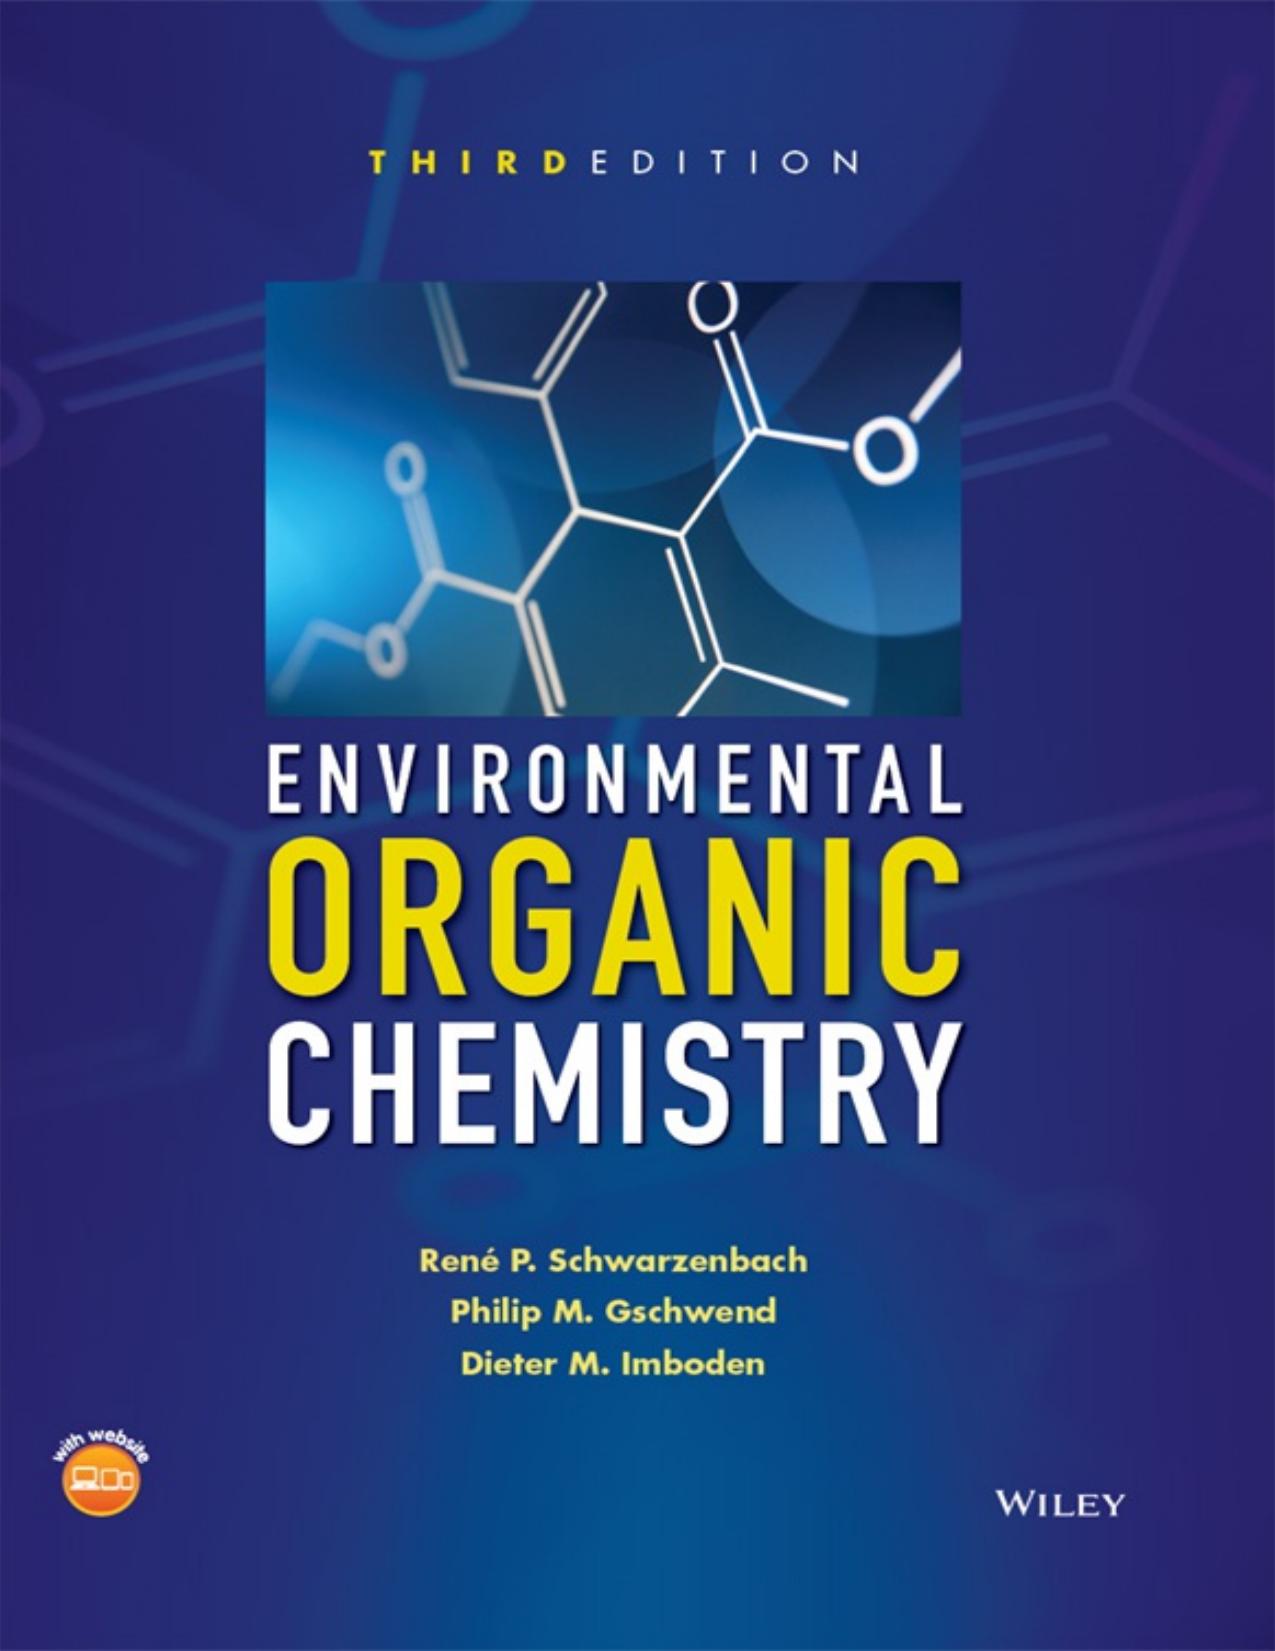 !NEW! Solution Manual For Environmental Organic Chemistry.zip